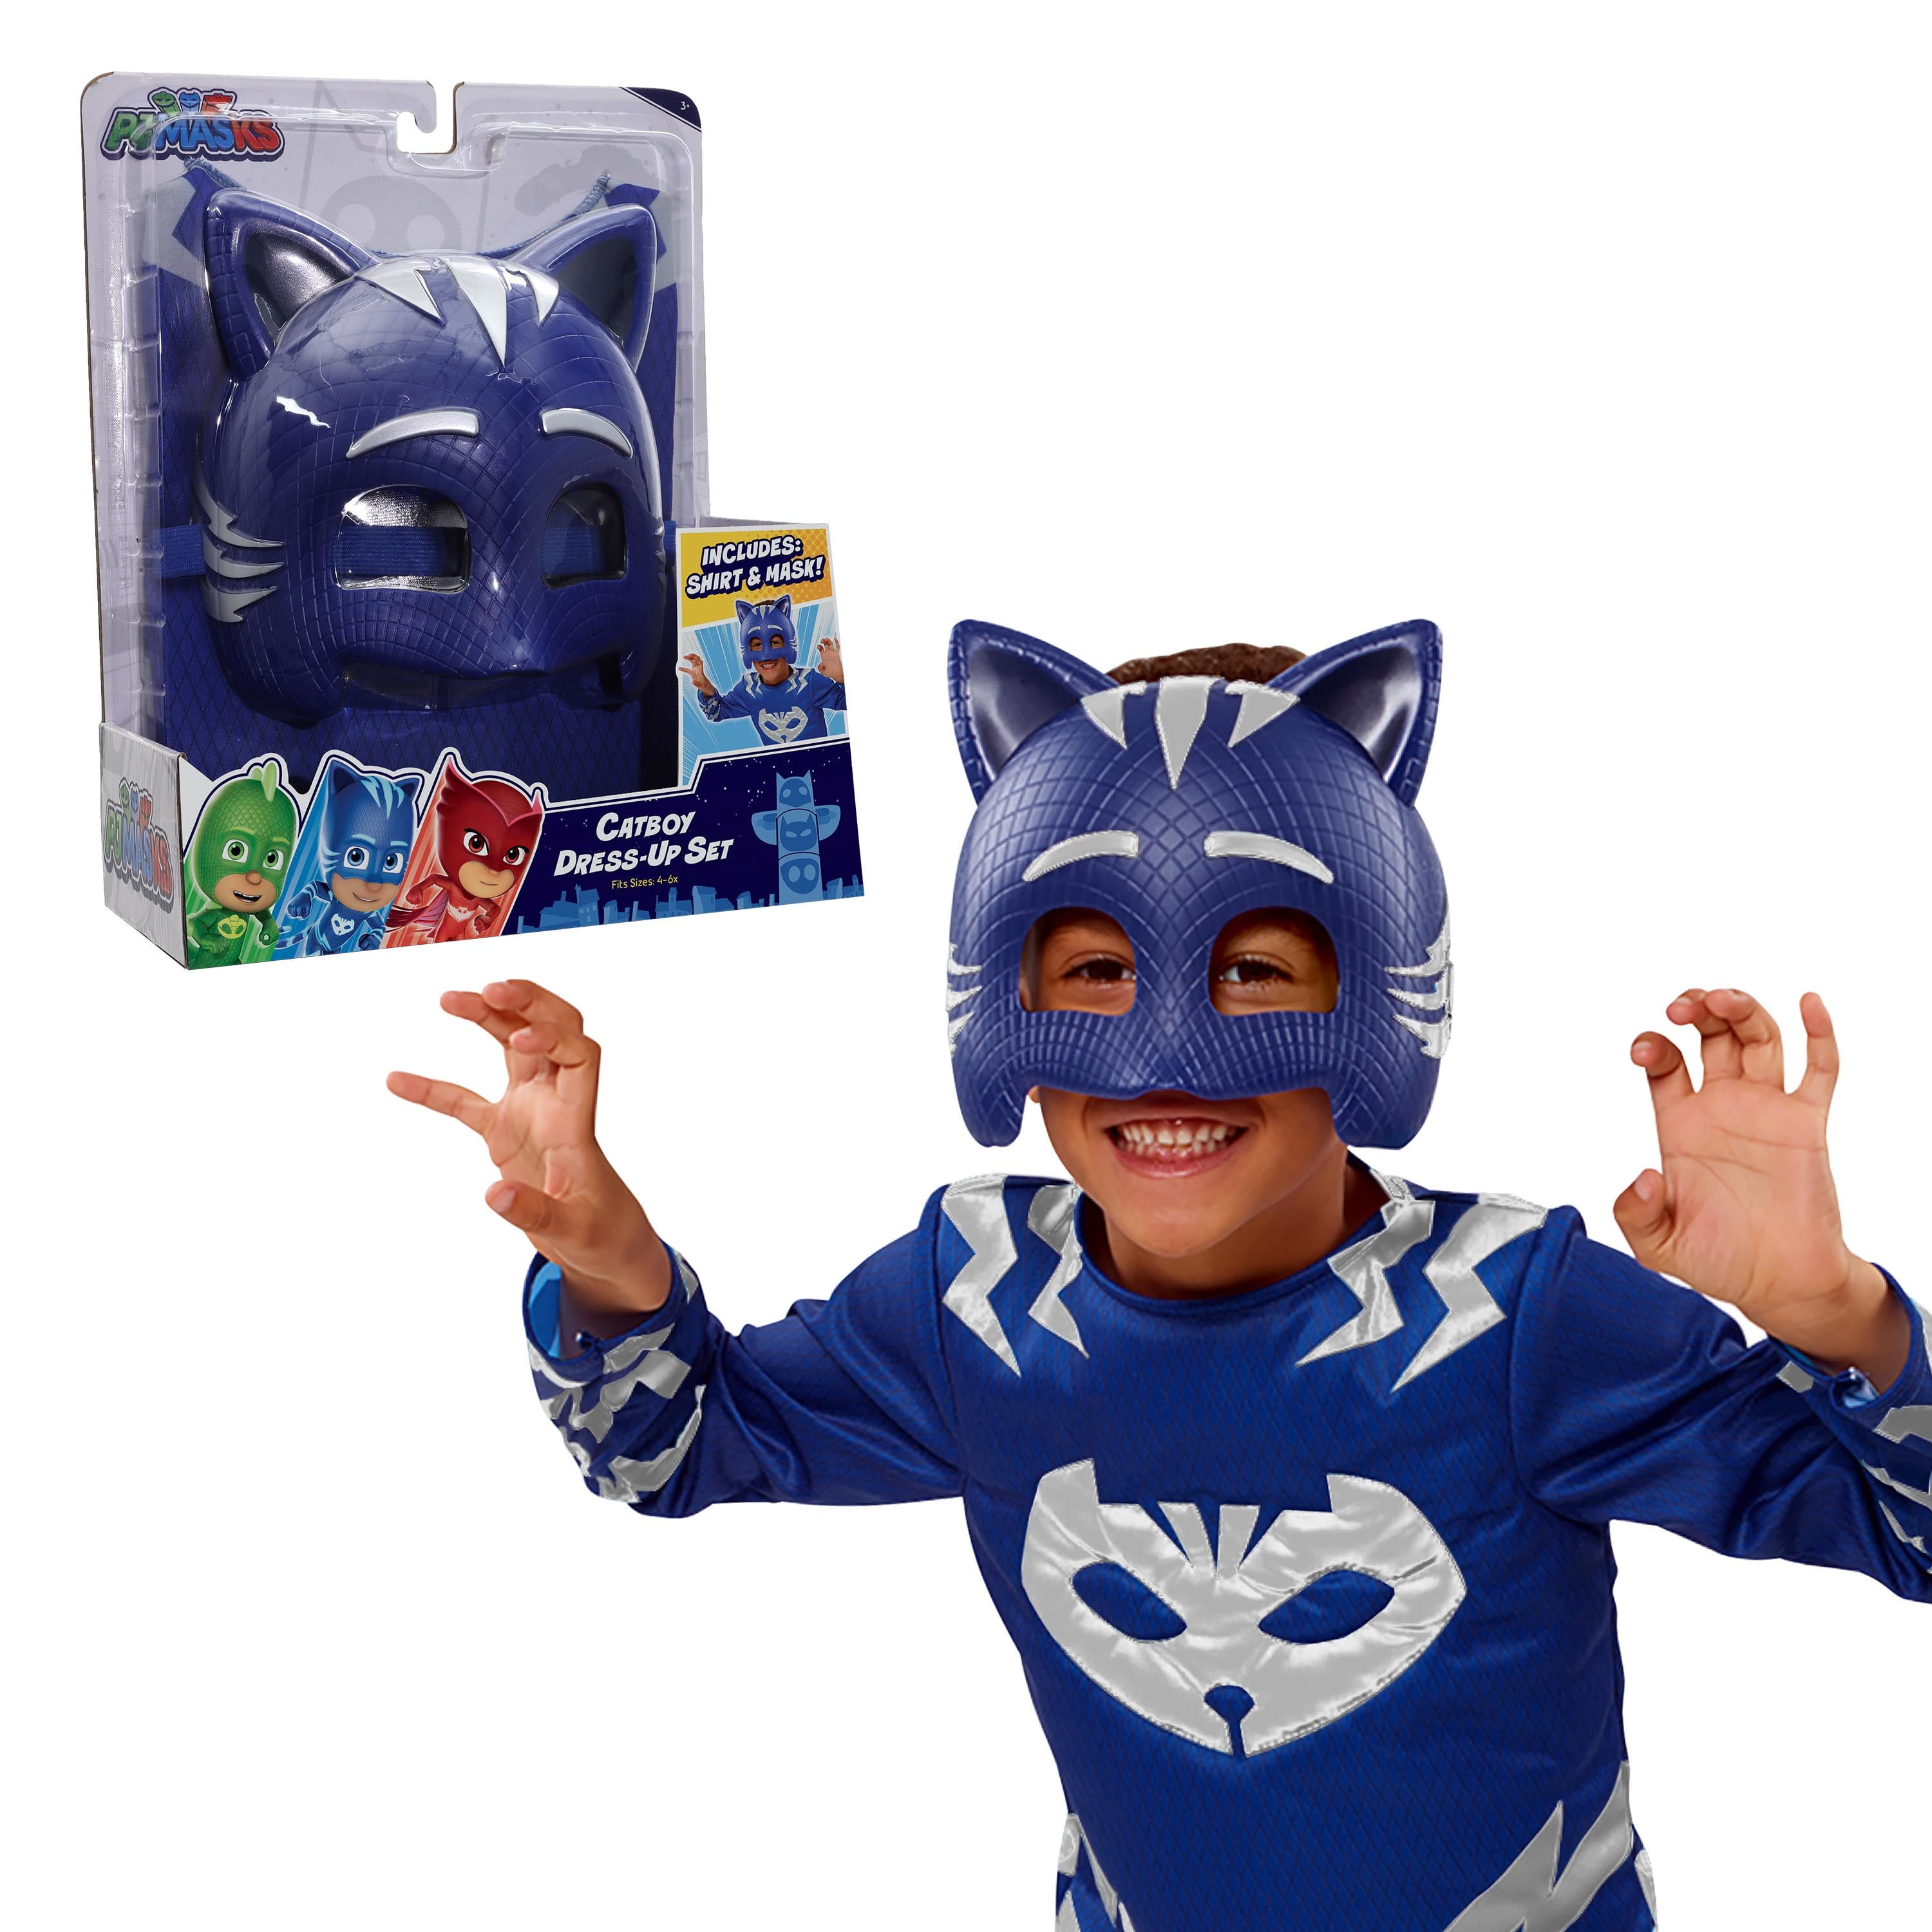 lime spherical peaceful PJ Masks Turbo Blast Catboy Dress Up Set, Kids Toys for Ages 3 Up, Gifts  and Presents - Walmart.com